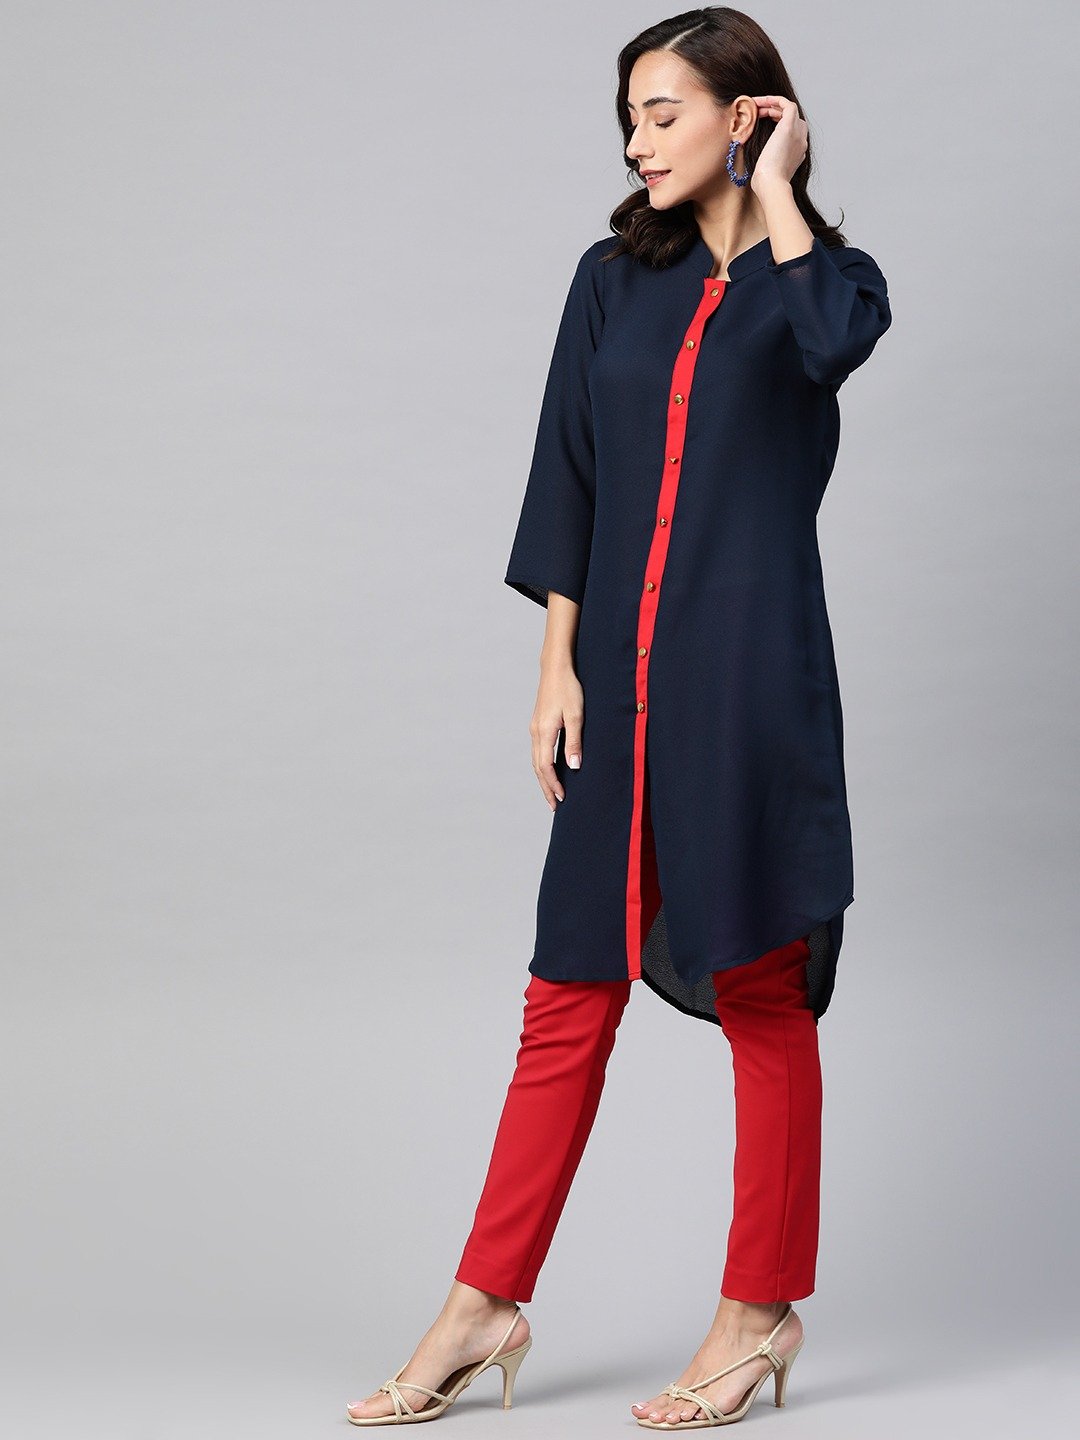 Women's Navy Blue & Red Solid A-line Kurta - Jompers